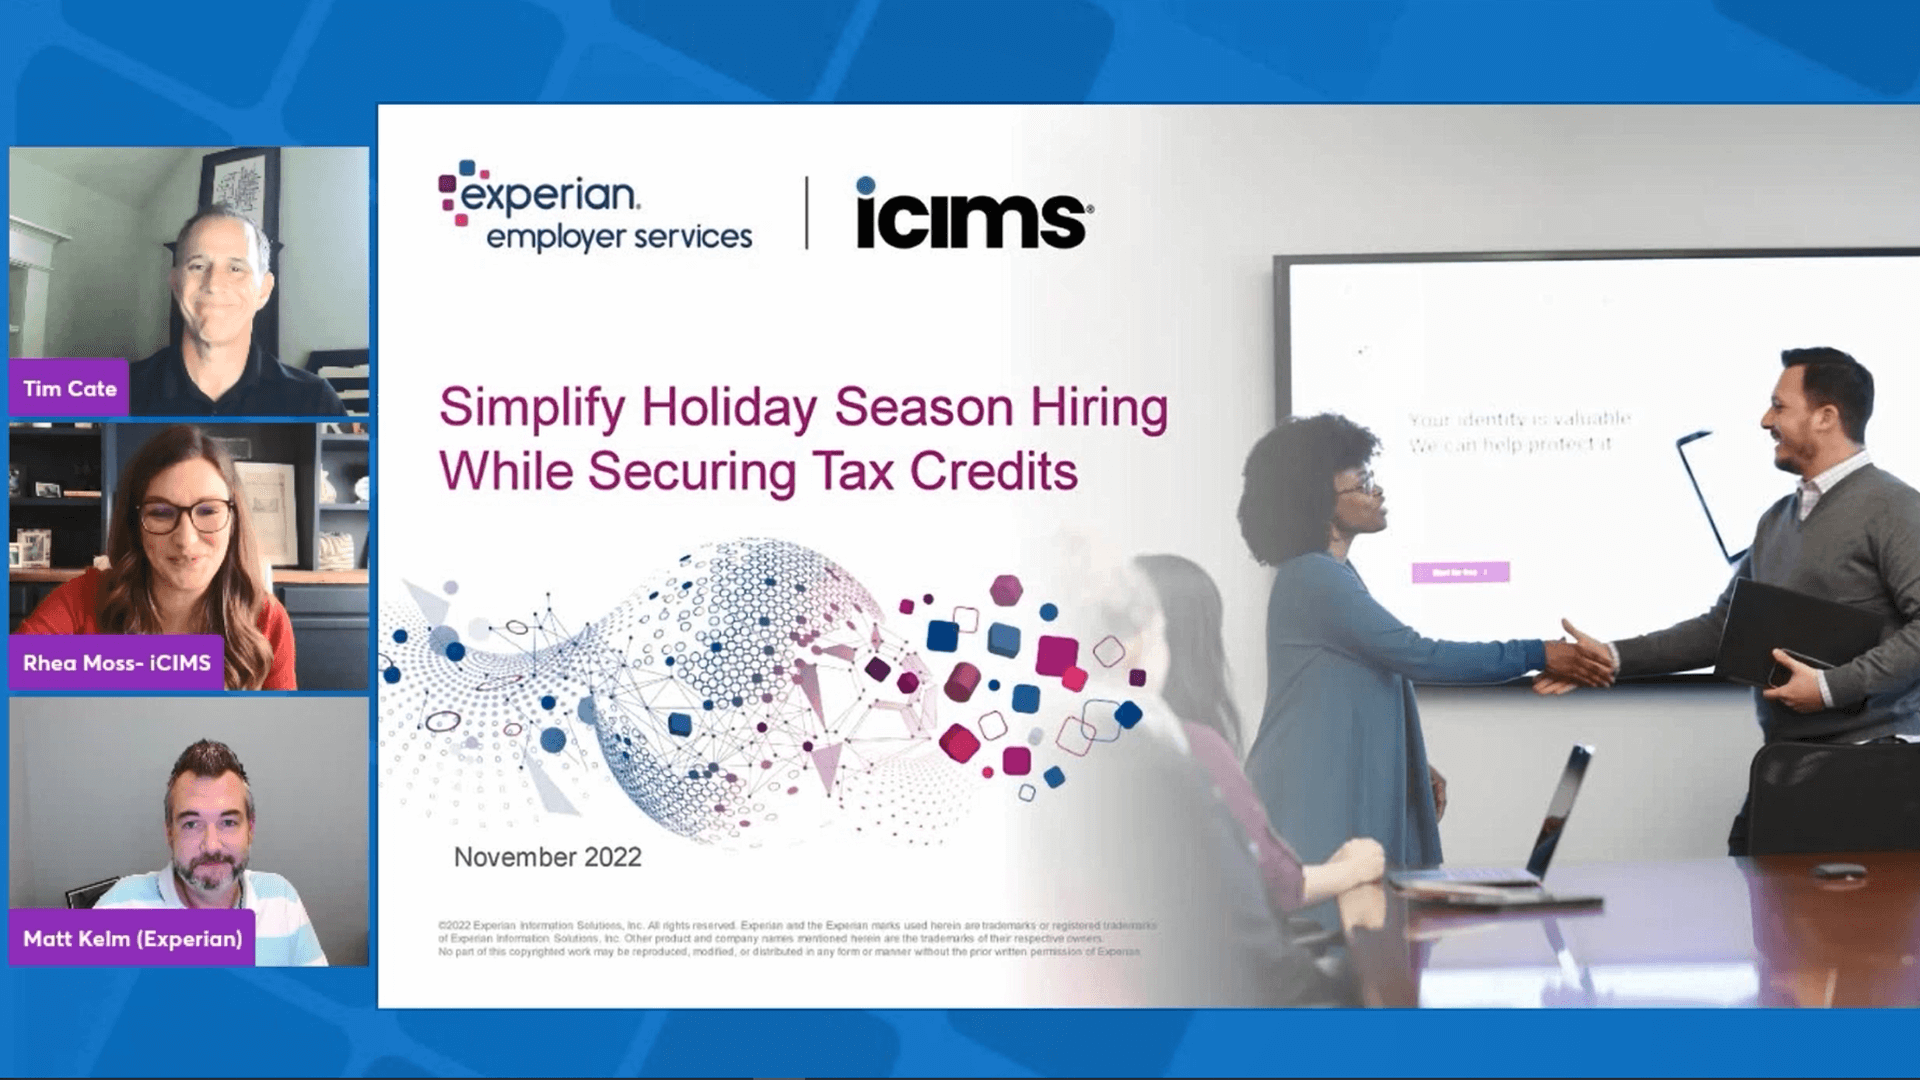 learn how to improve onboarding for holiday season hiring while securing tax credits